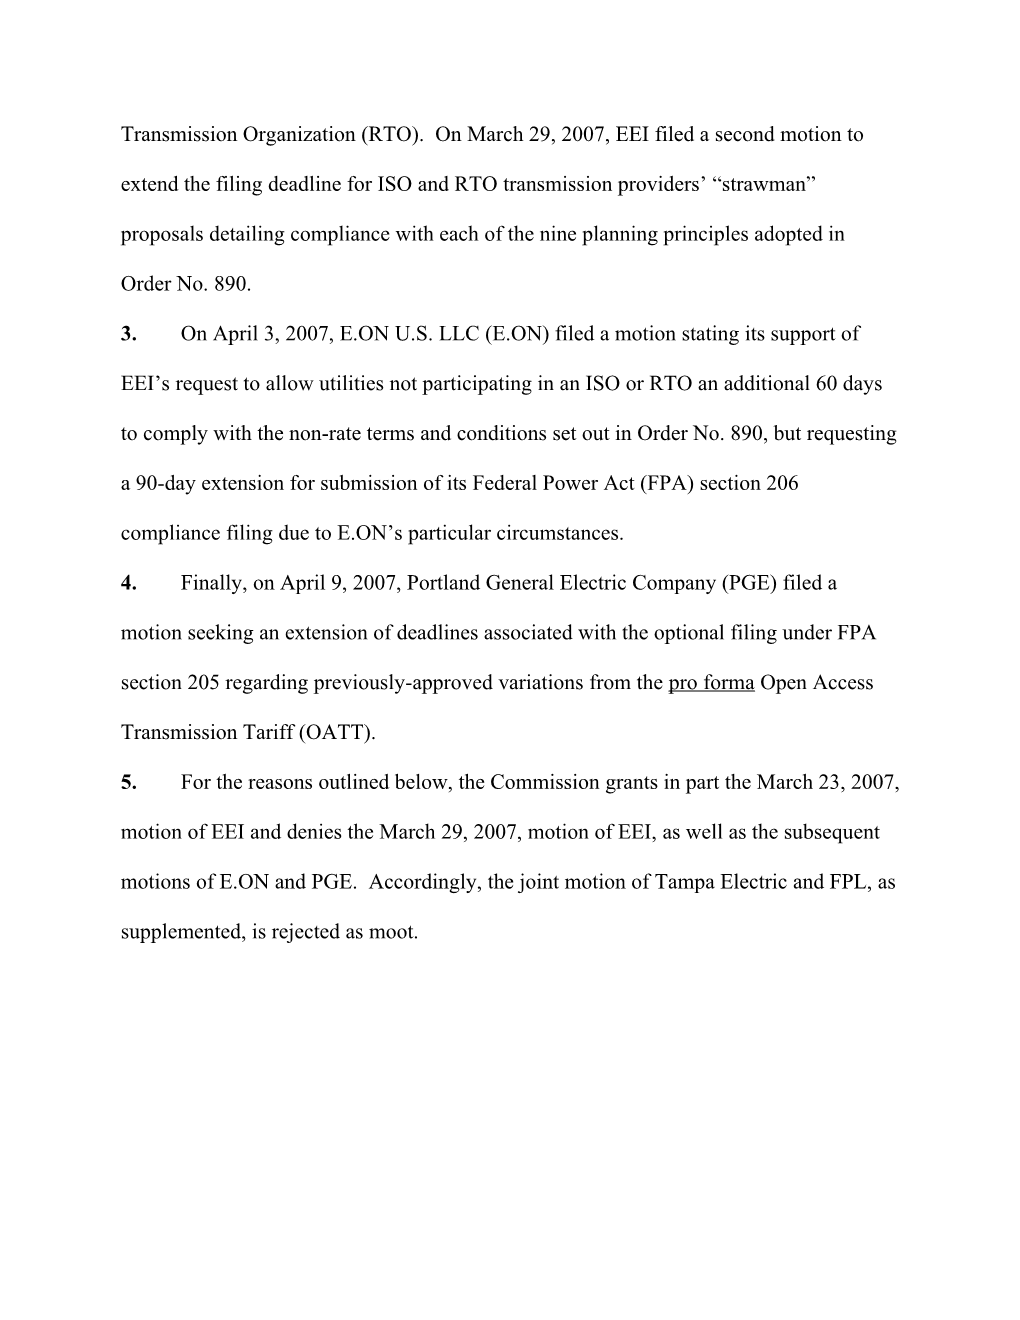 April 11, 2007 Order Granting Extension of Compliance Action Dates Re: Order 890